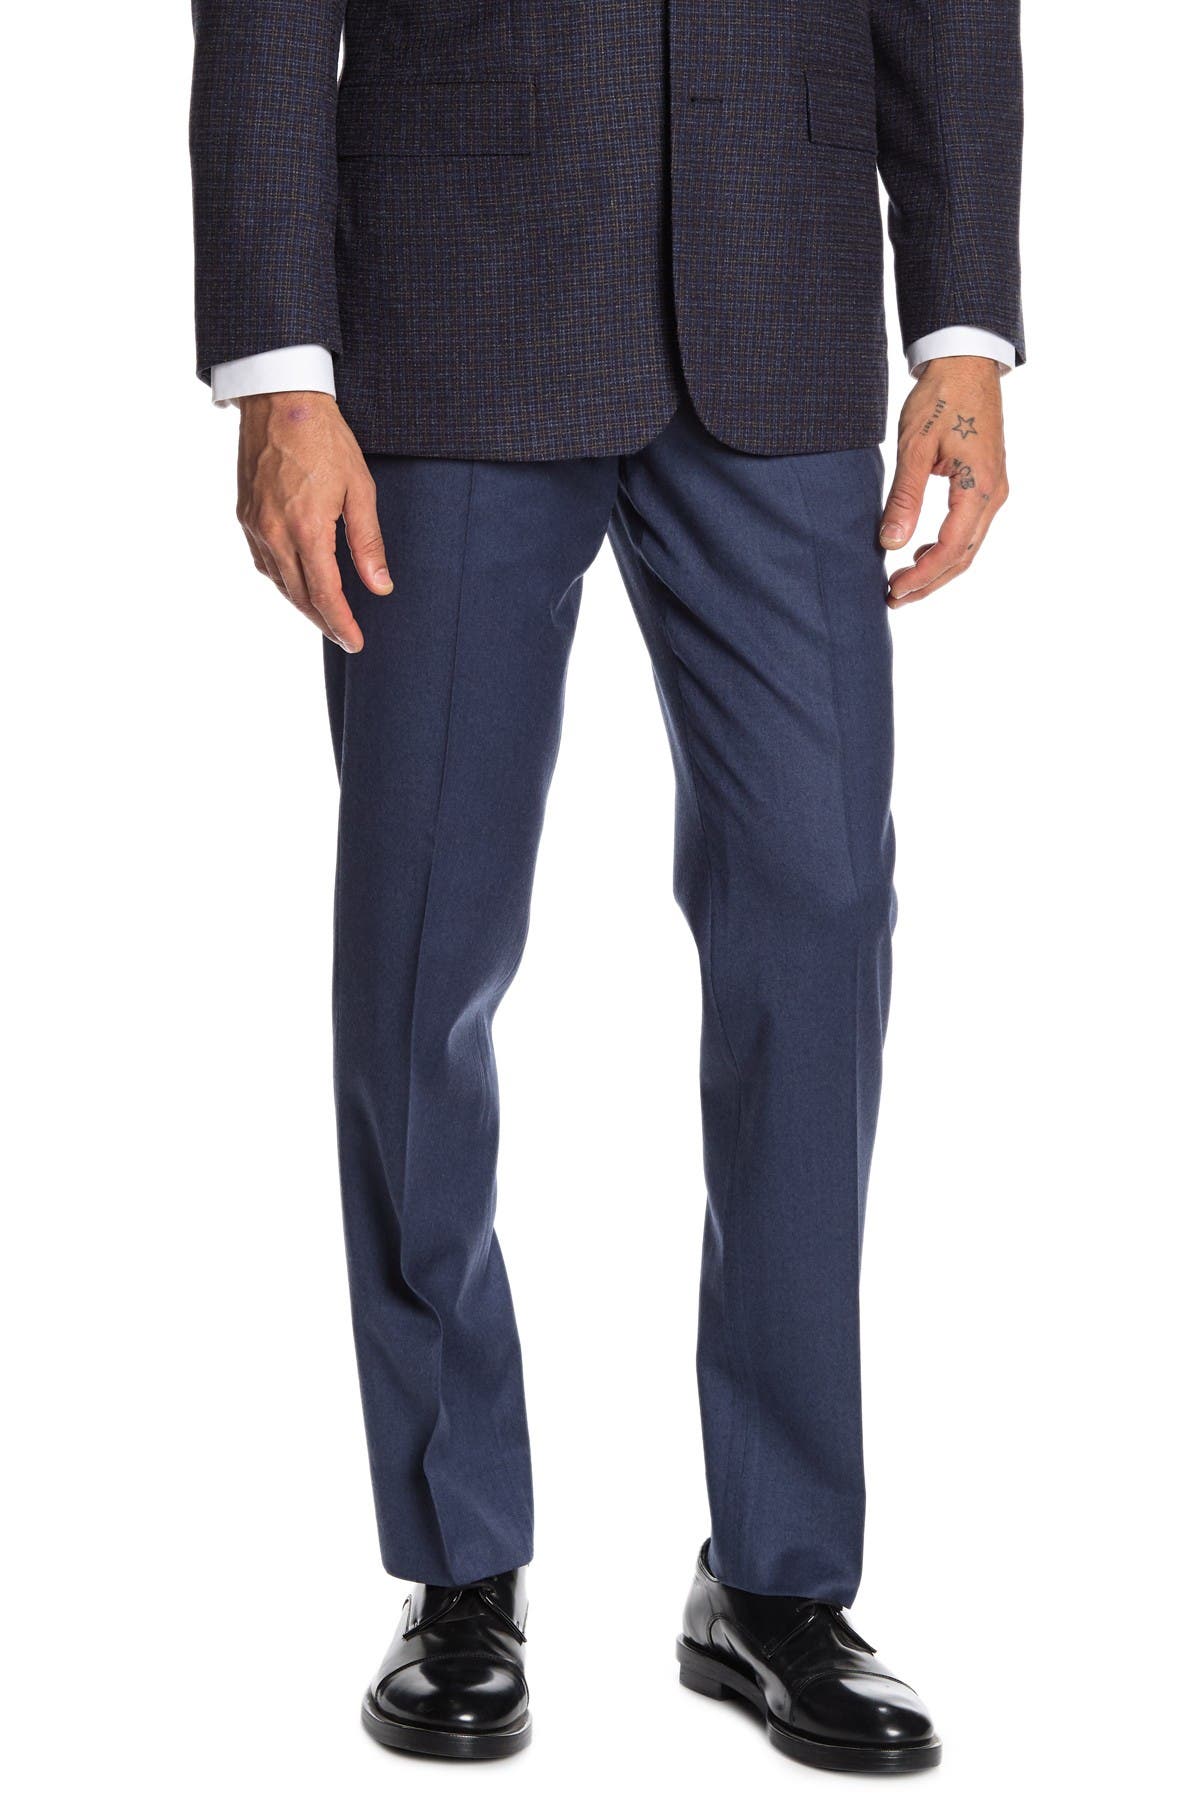 brooks brothers suit separates